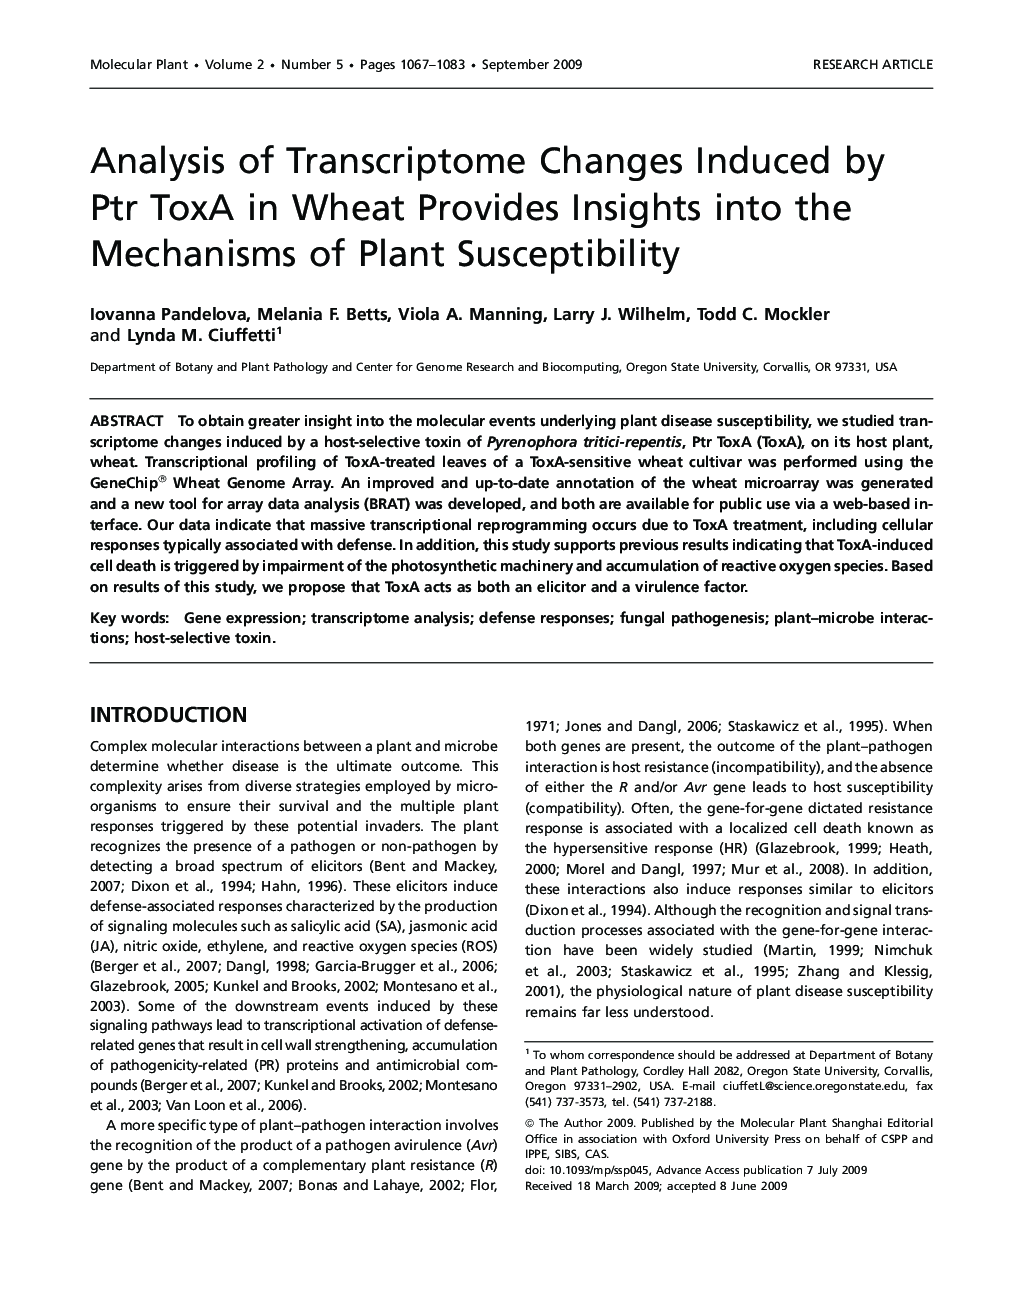 Analysis of Transcriptome Changes Induced by Ptr ToxA in Wheat Provides Insights into the Mechanisms of Plant Susceptibility 